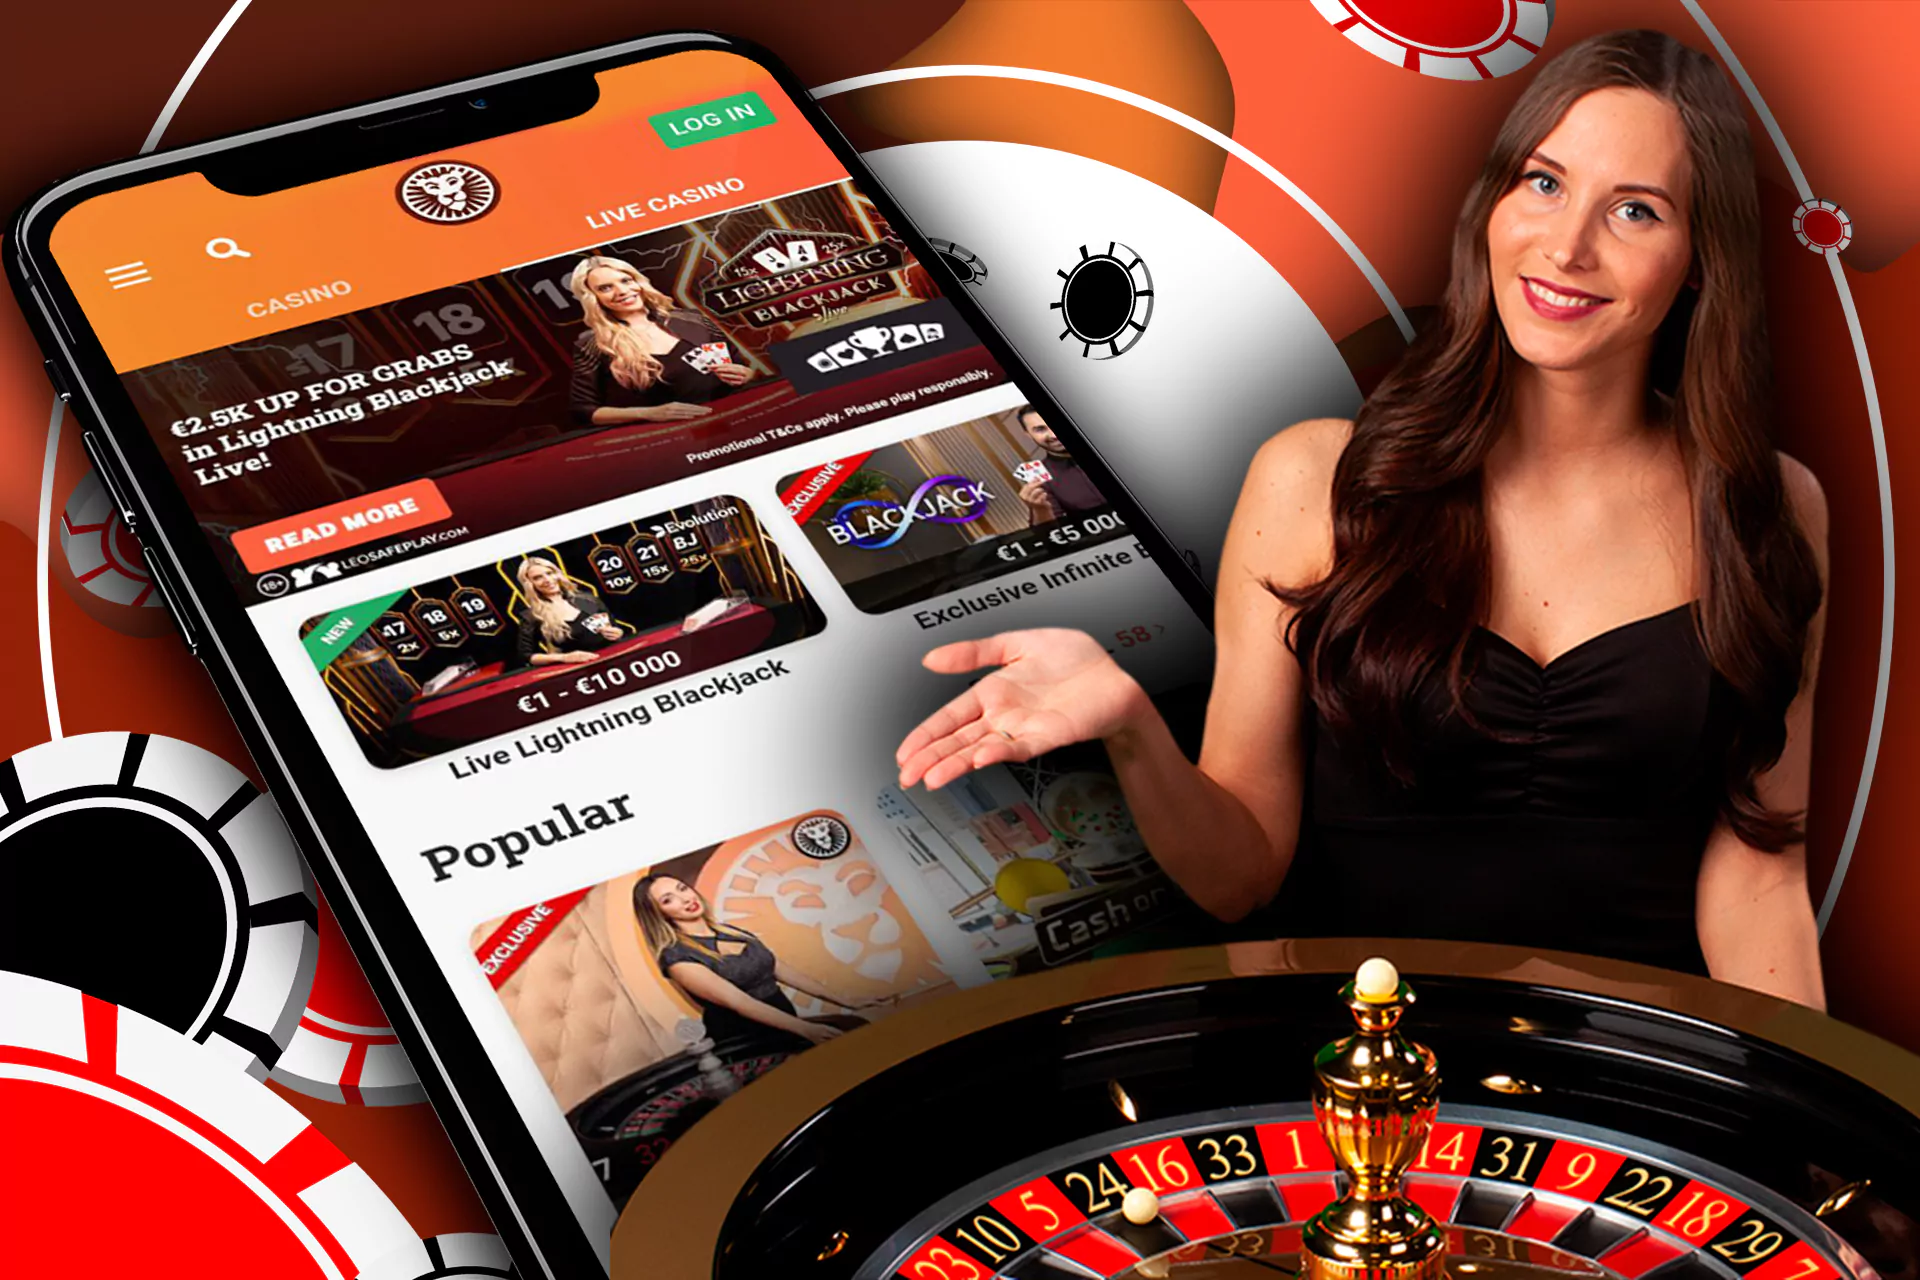 Try to play casino games with real dealers.